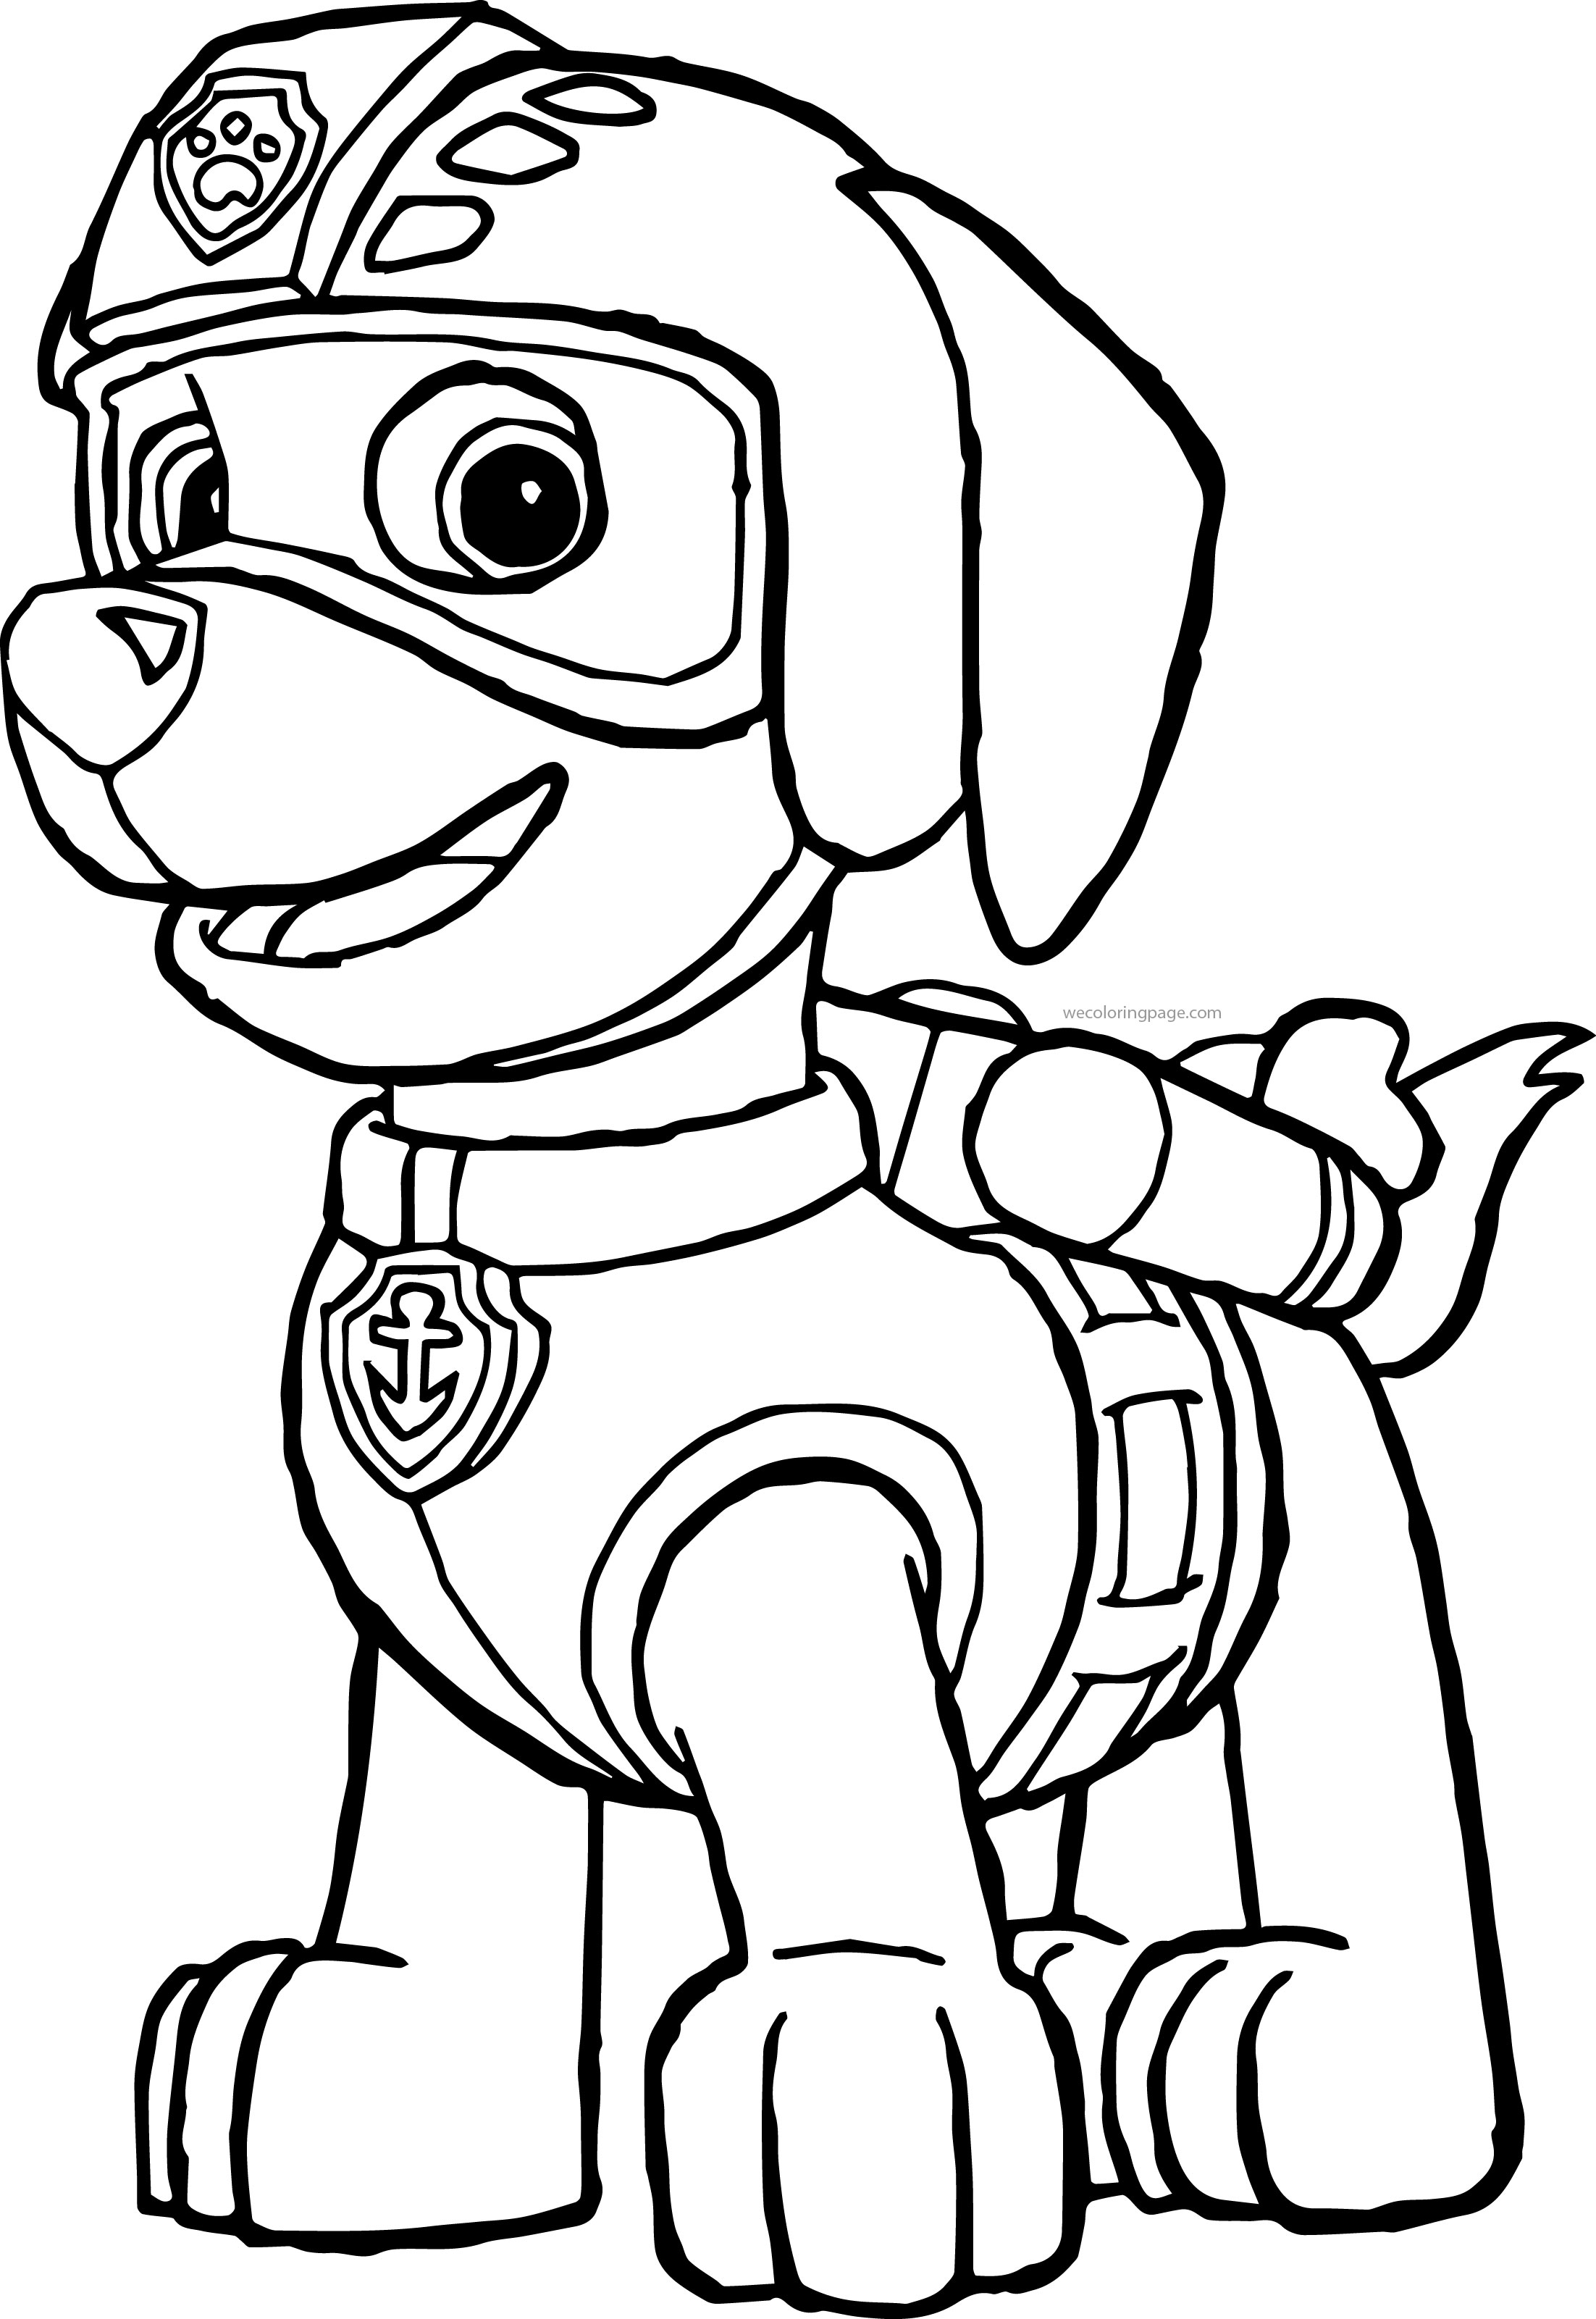 Paw Patrol Chase Ausmalbilder Kostenlos Paw Patrol Chase Jumping Coloring Pages Cartoons